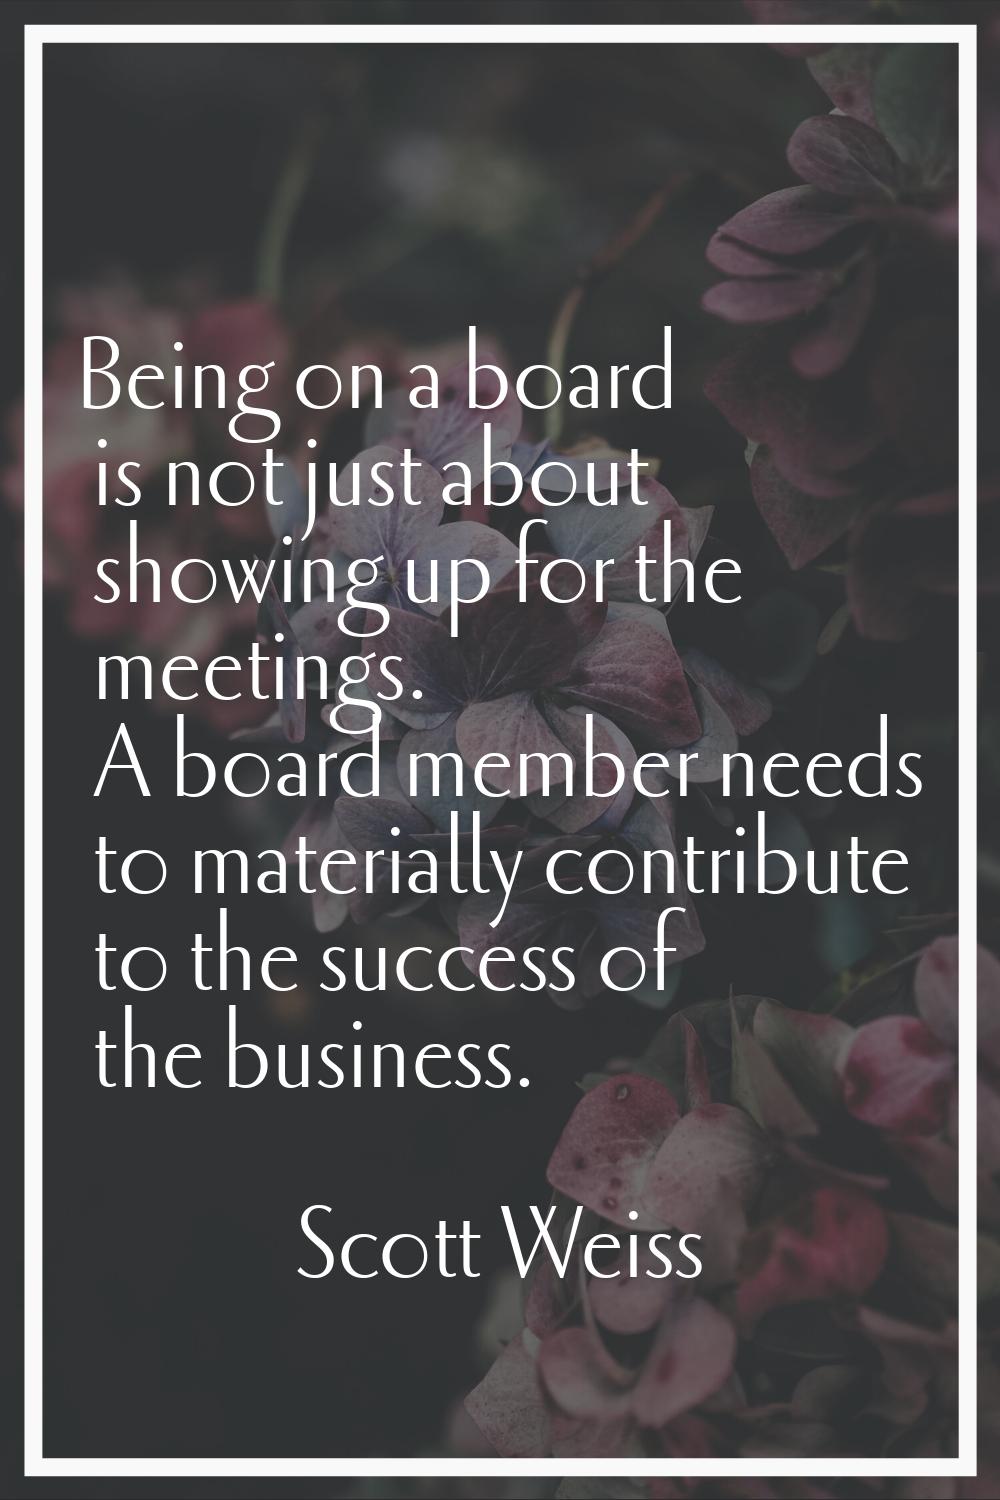 Being on a board is not just about showing up for the meetings. A board member needs to materially 